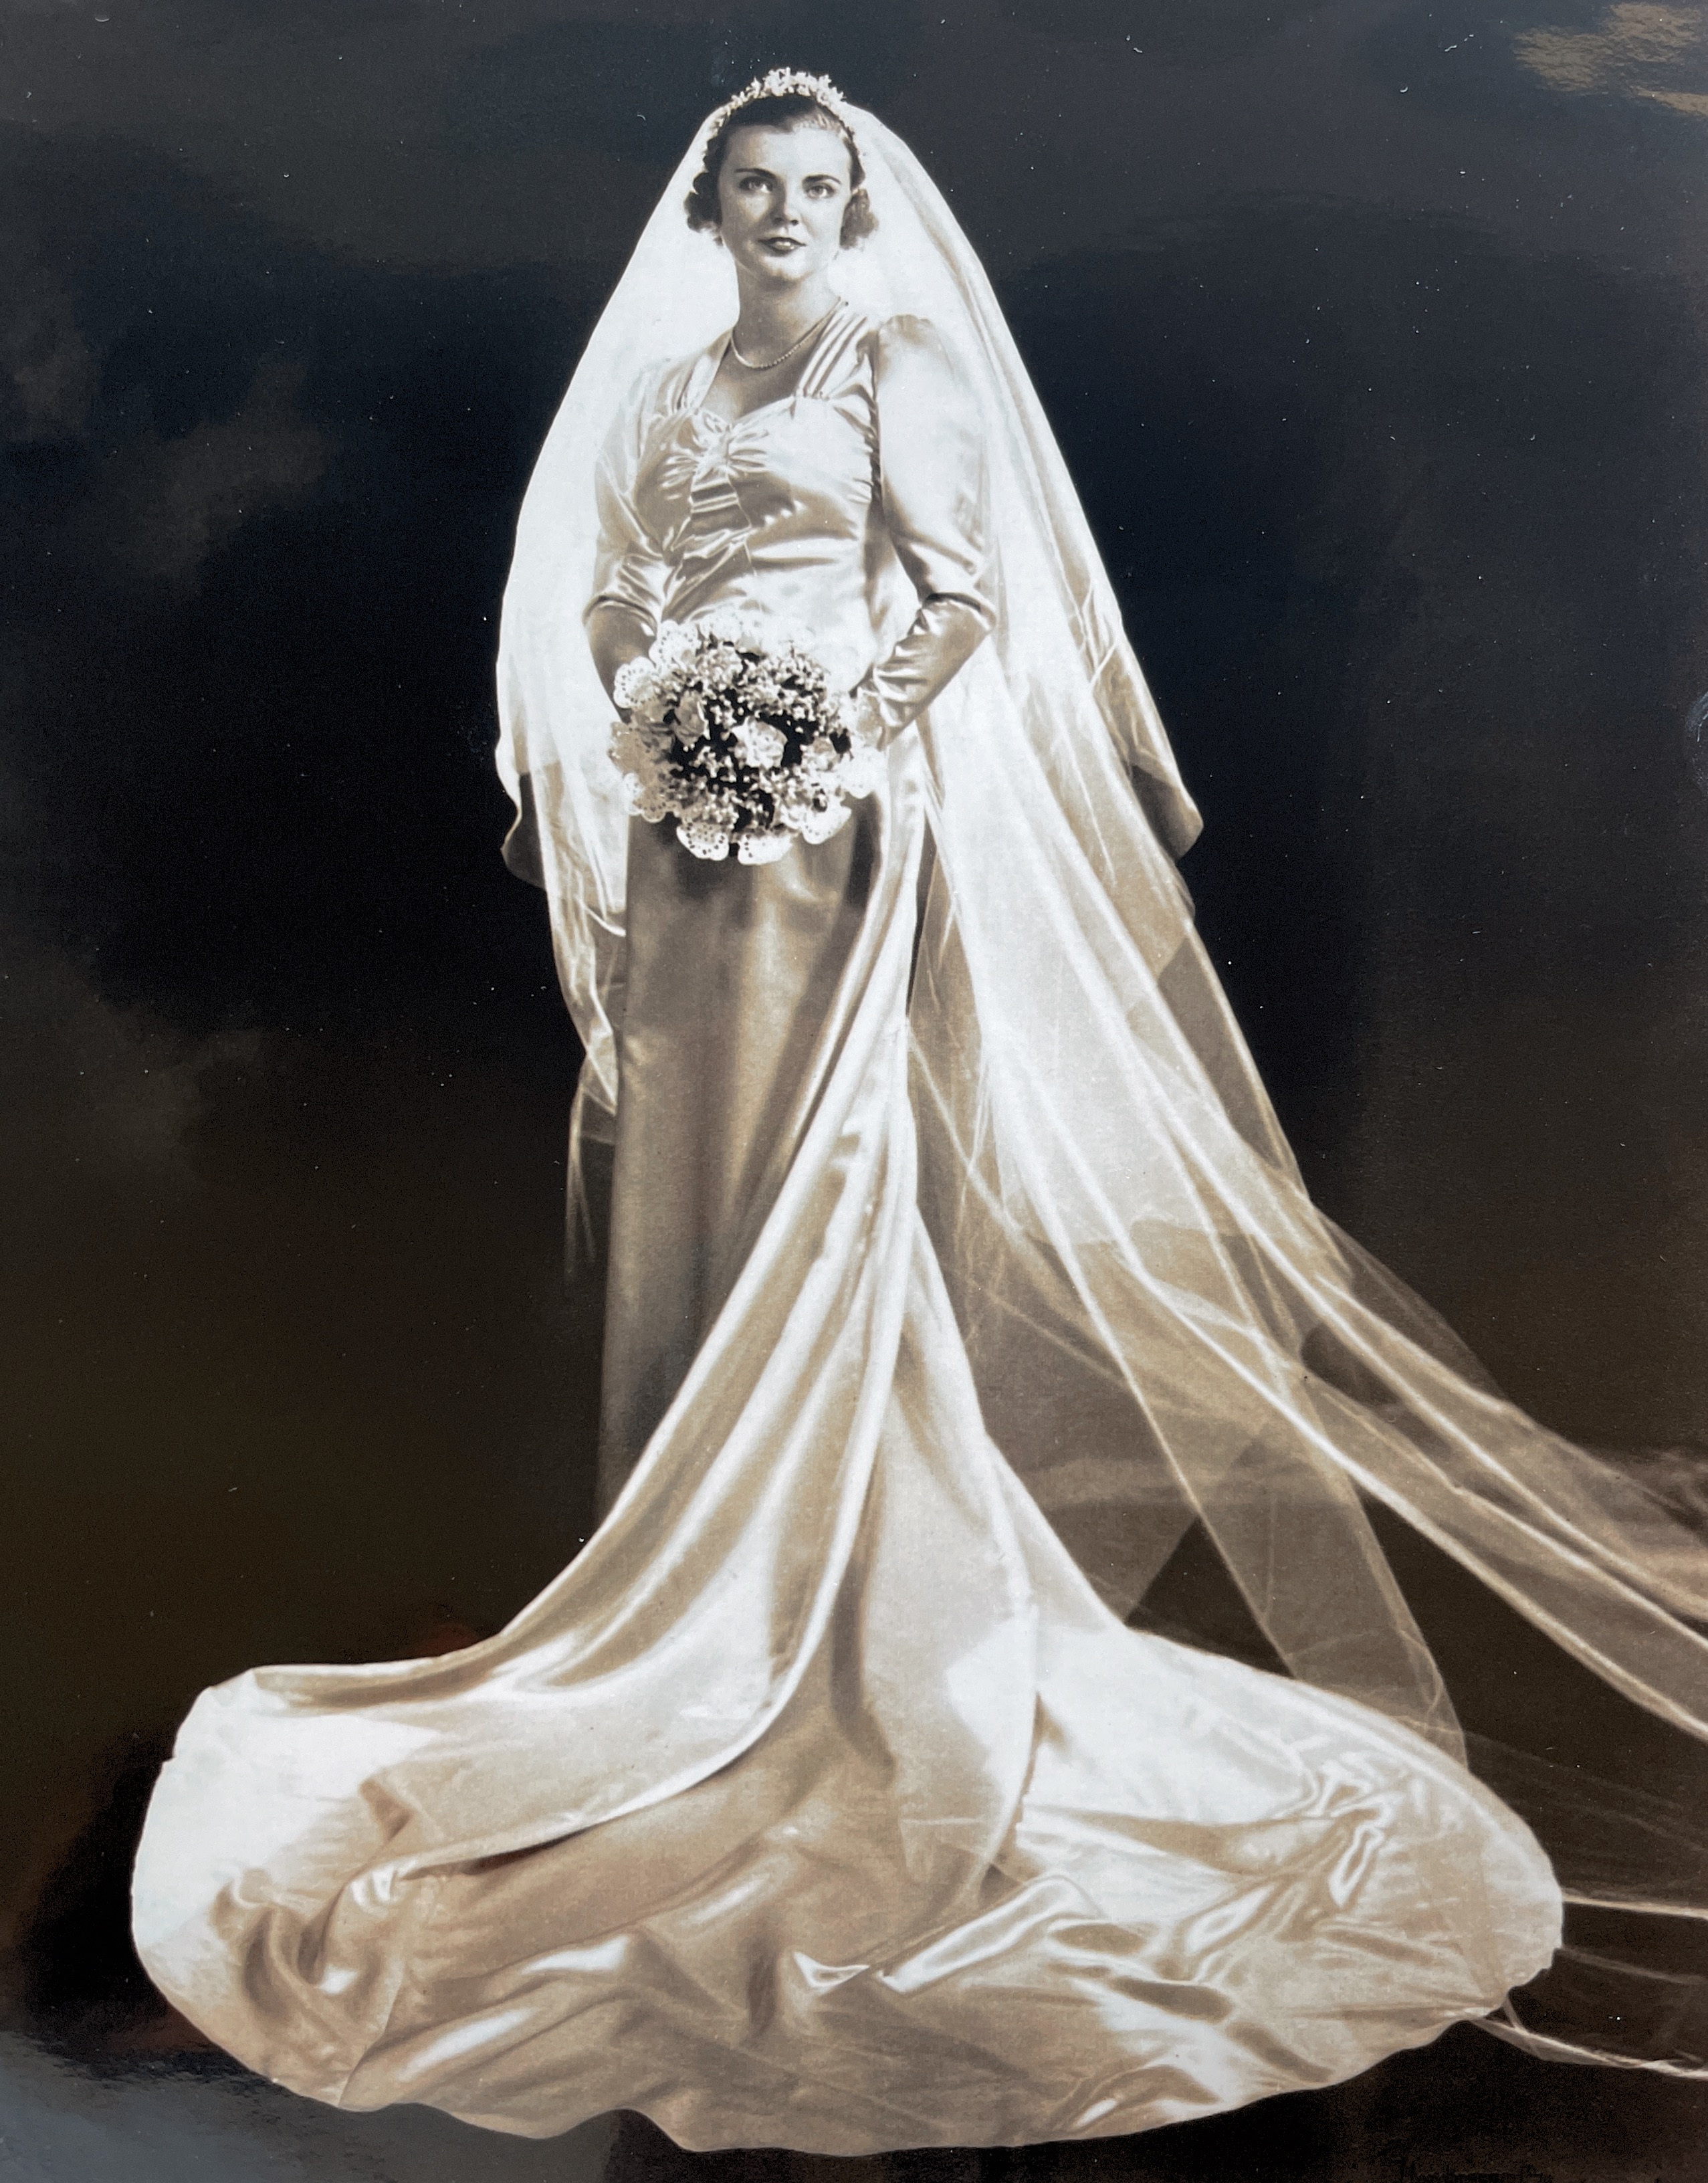 Adelle Mae Burkman on her wedding day. Married Victor E Refalvy on May 21, 1938.